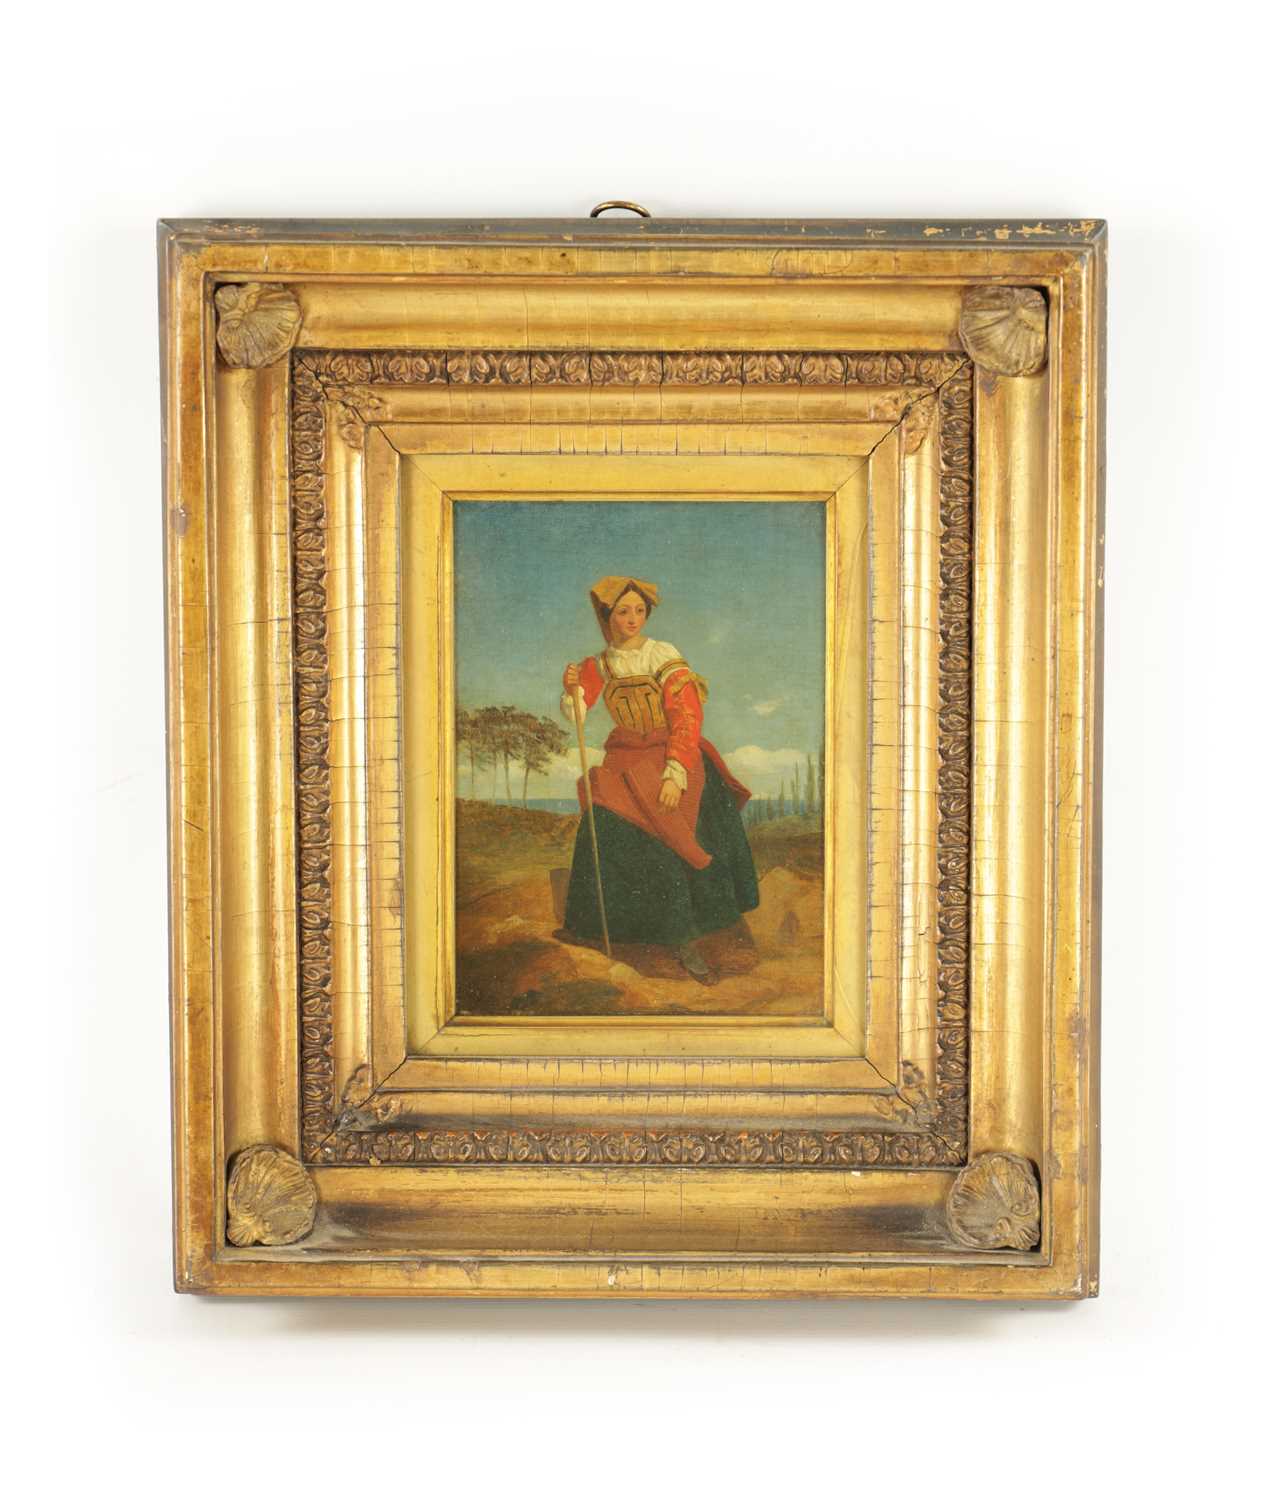 Lot 1127 - AN 18TH / 19TH CENTURY CONTINENTAL OIL ON CANVAS